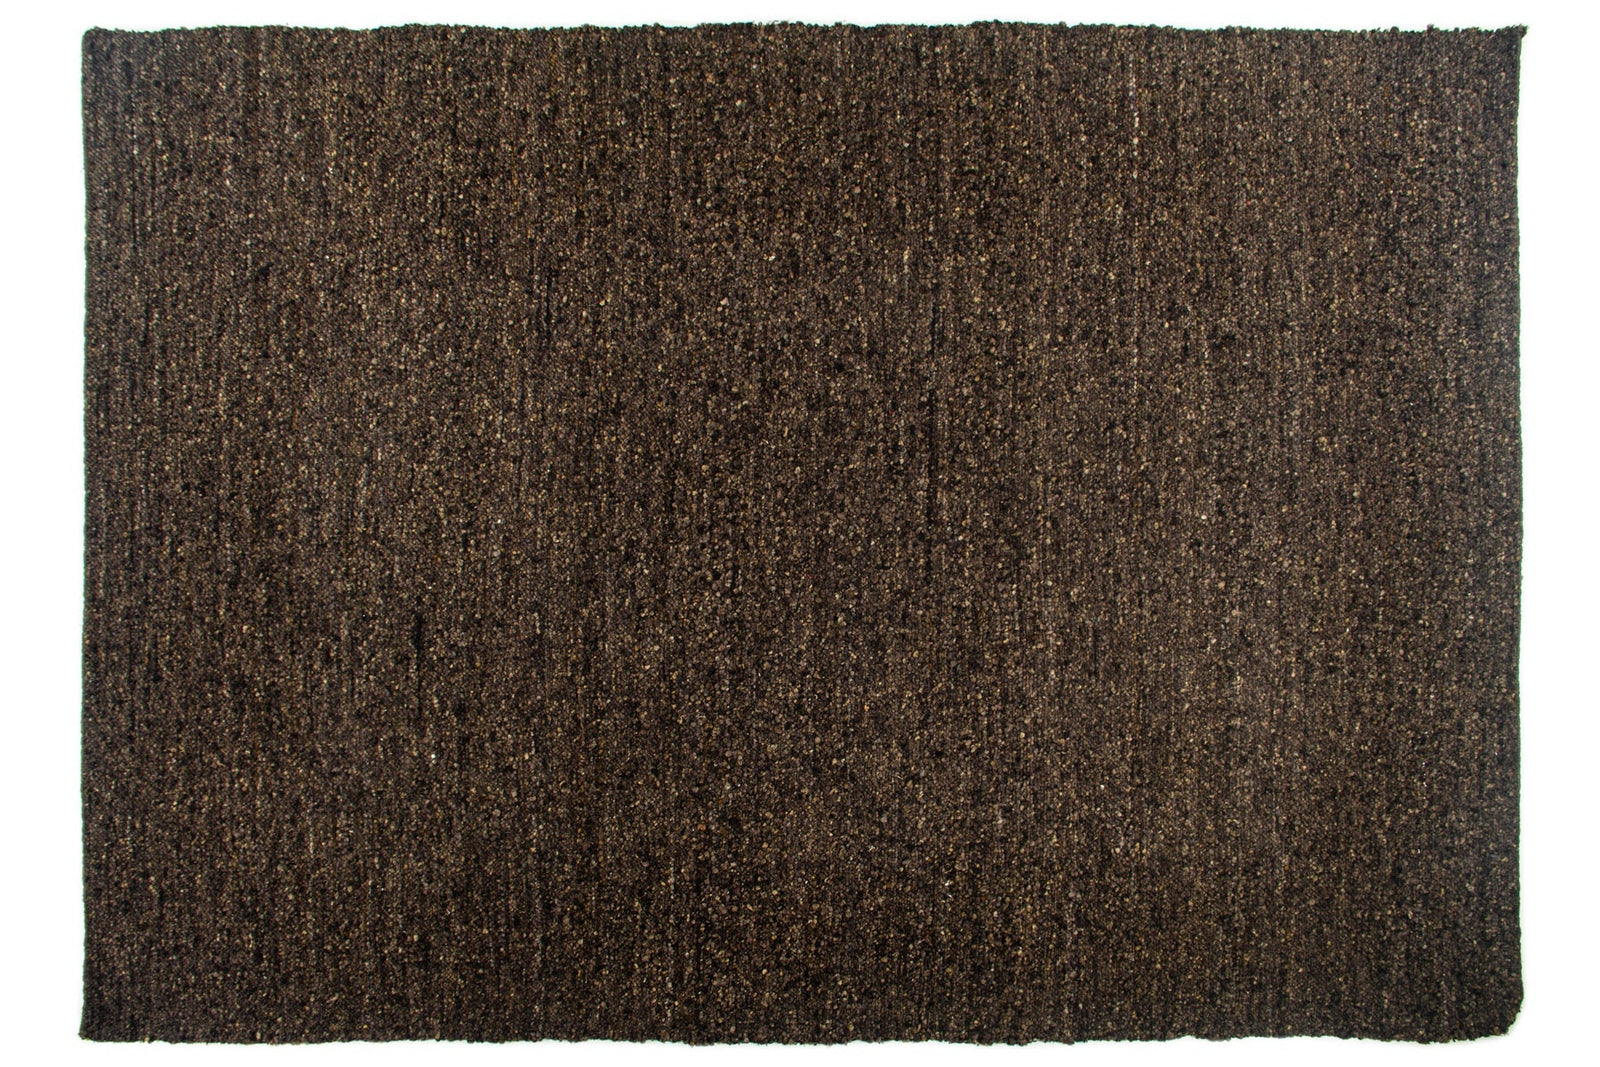 Sweater rug in charcoal BHN